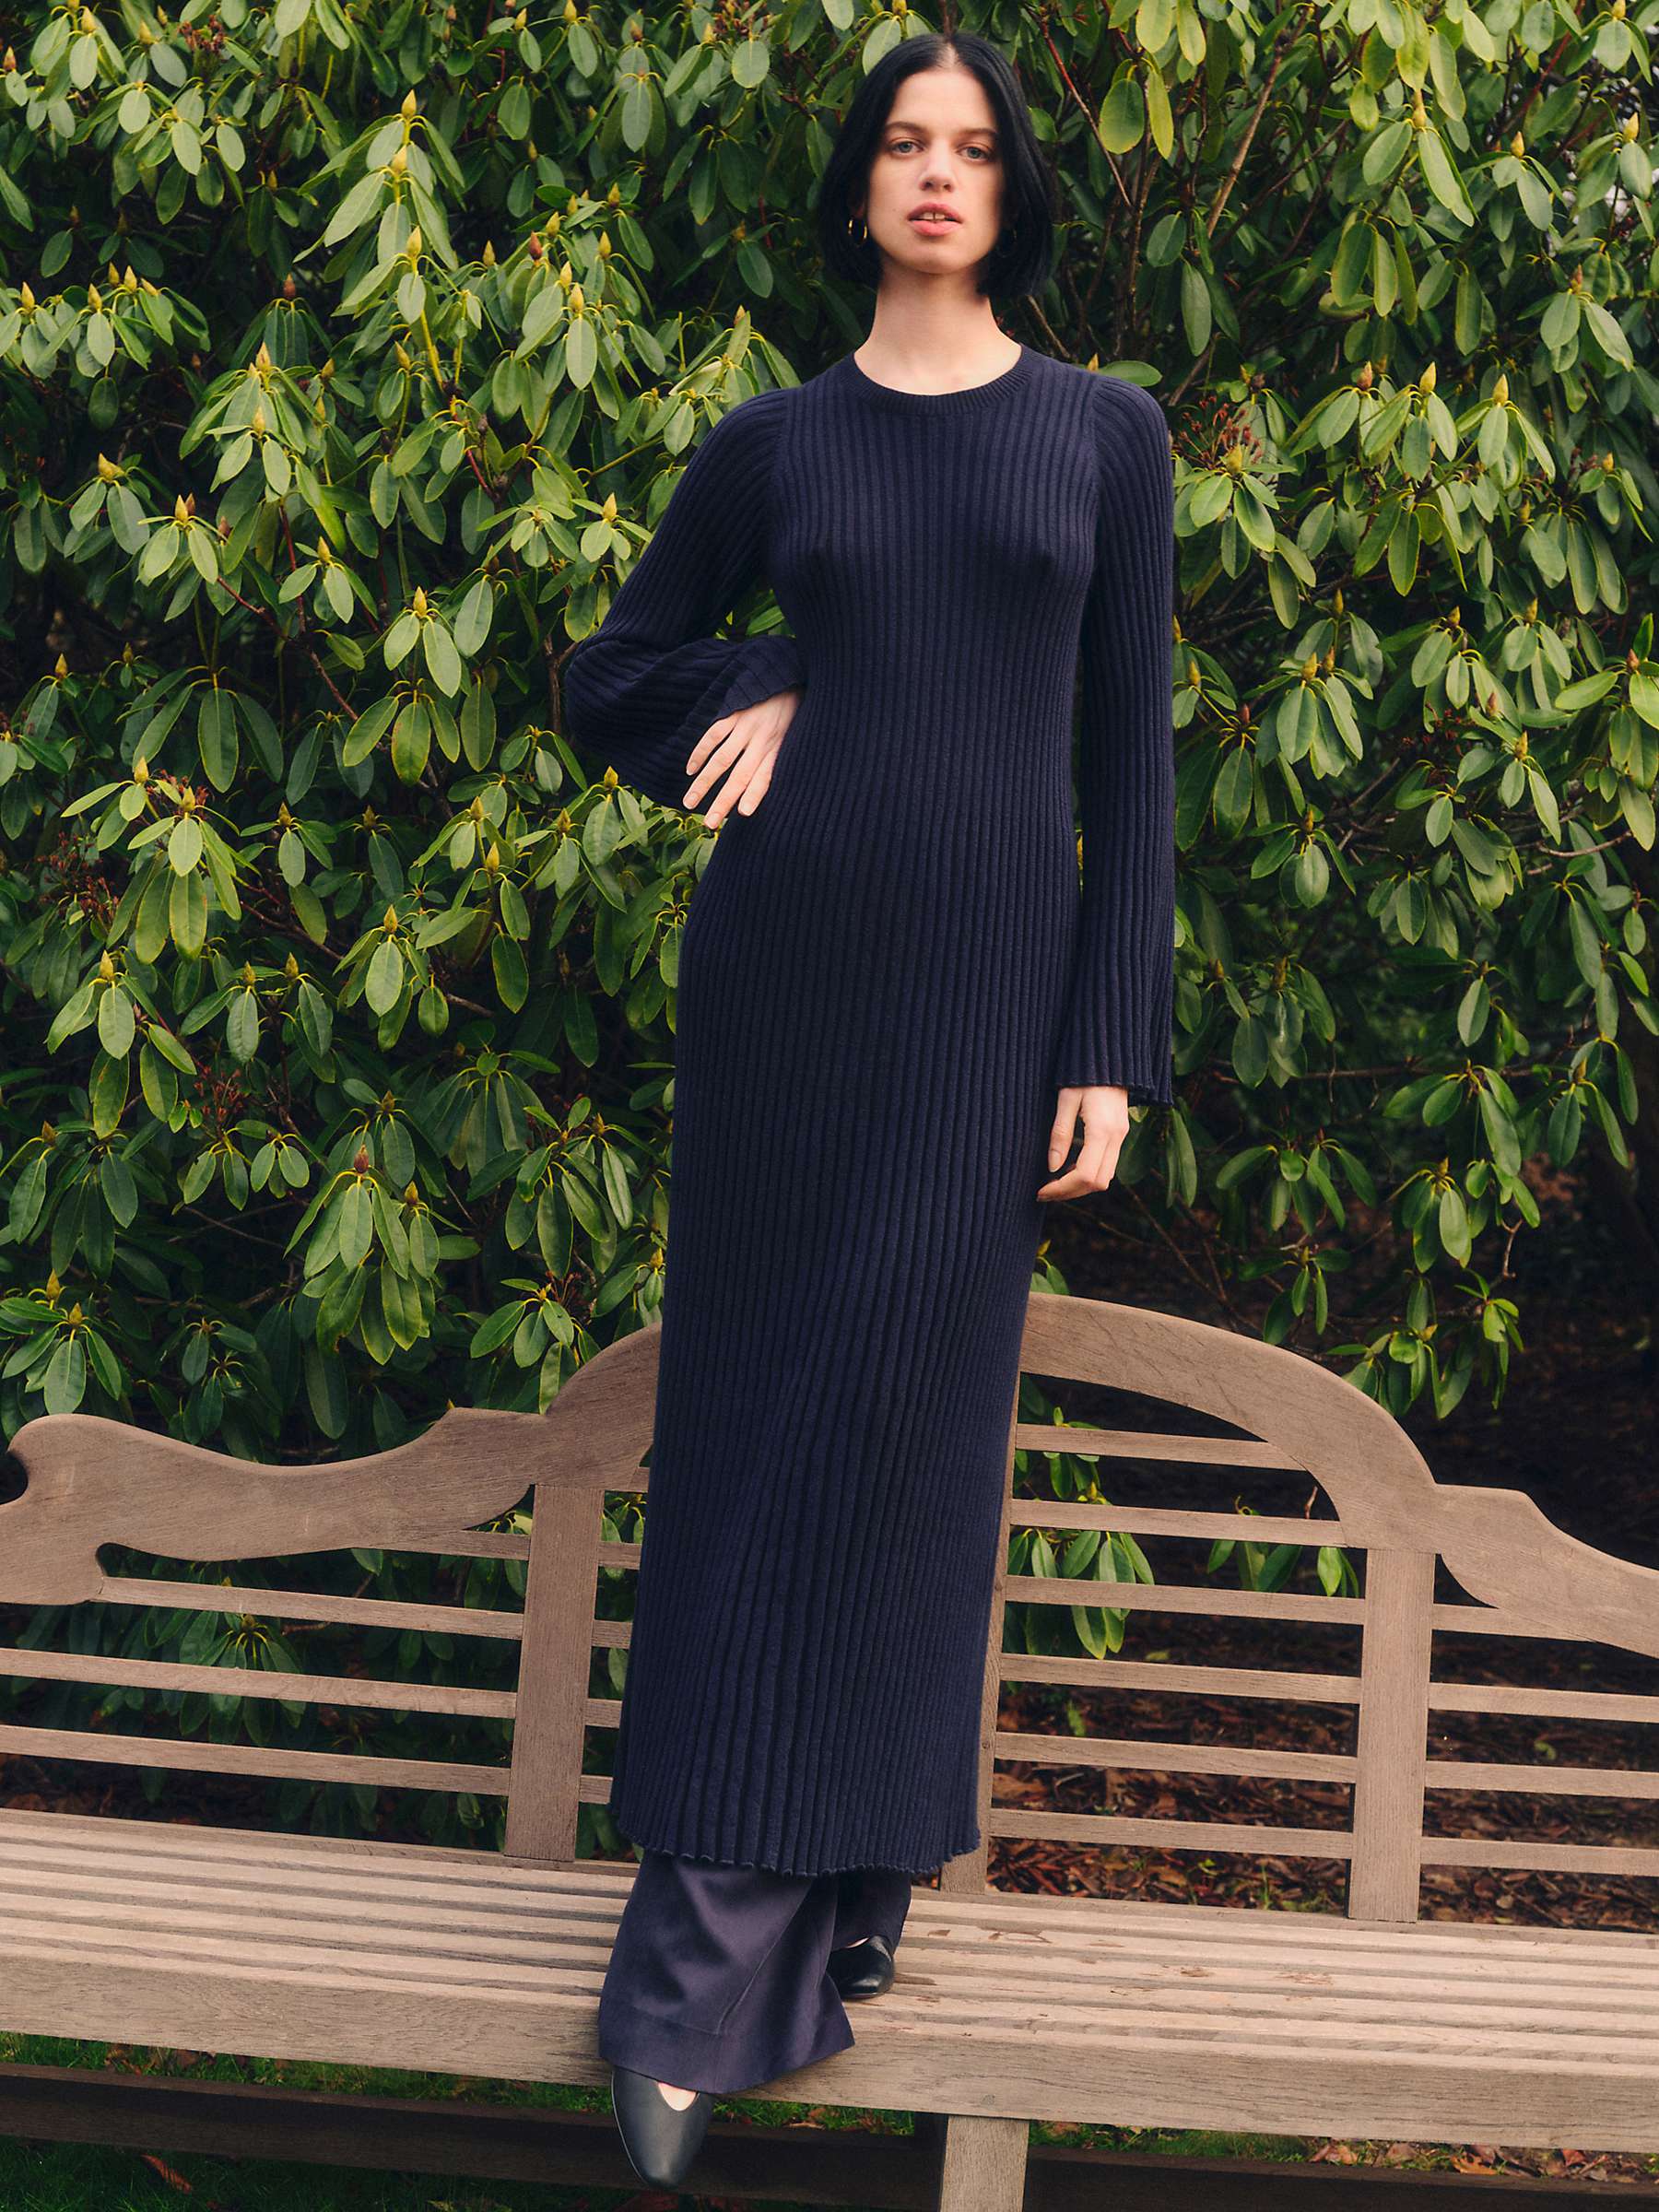 Buy HUSH Penny Crew Neck Ribbed Wool Blend Maxi Dress, Midnight Navy Online at johnlewis.com